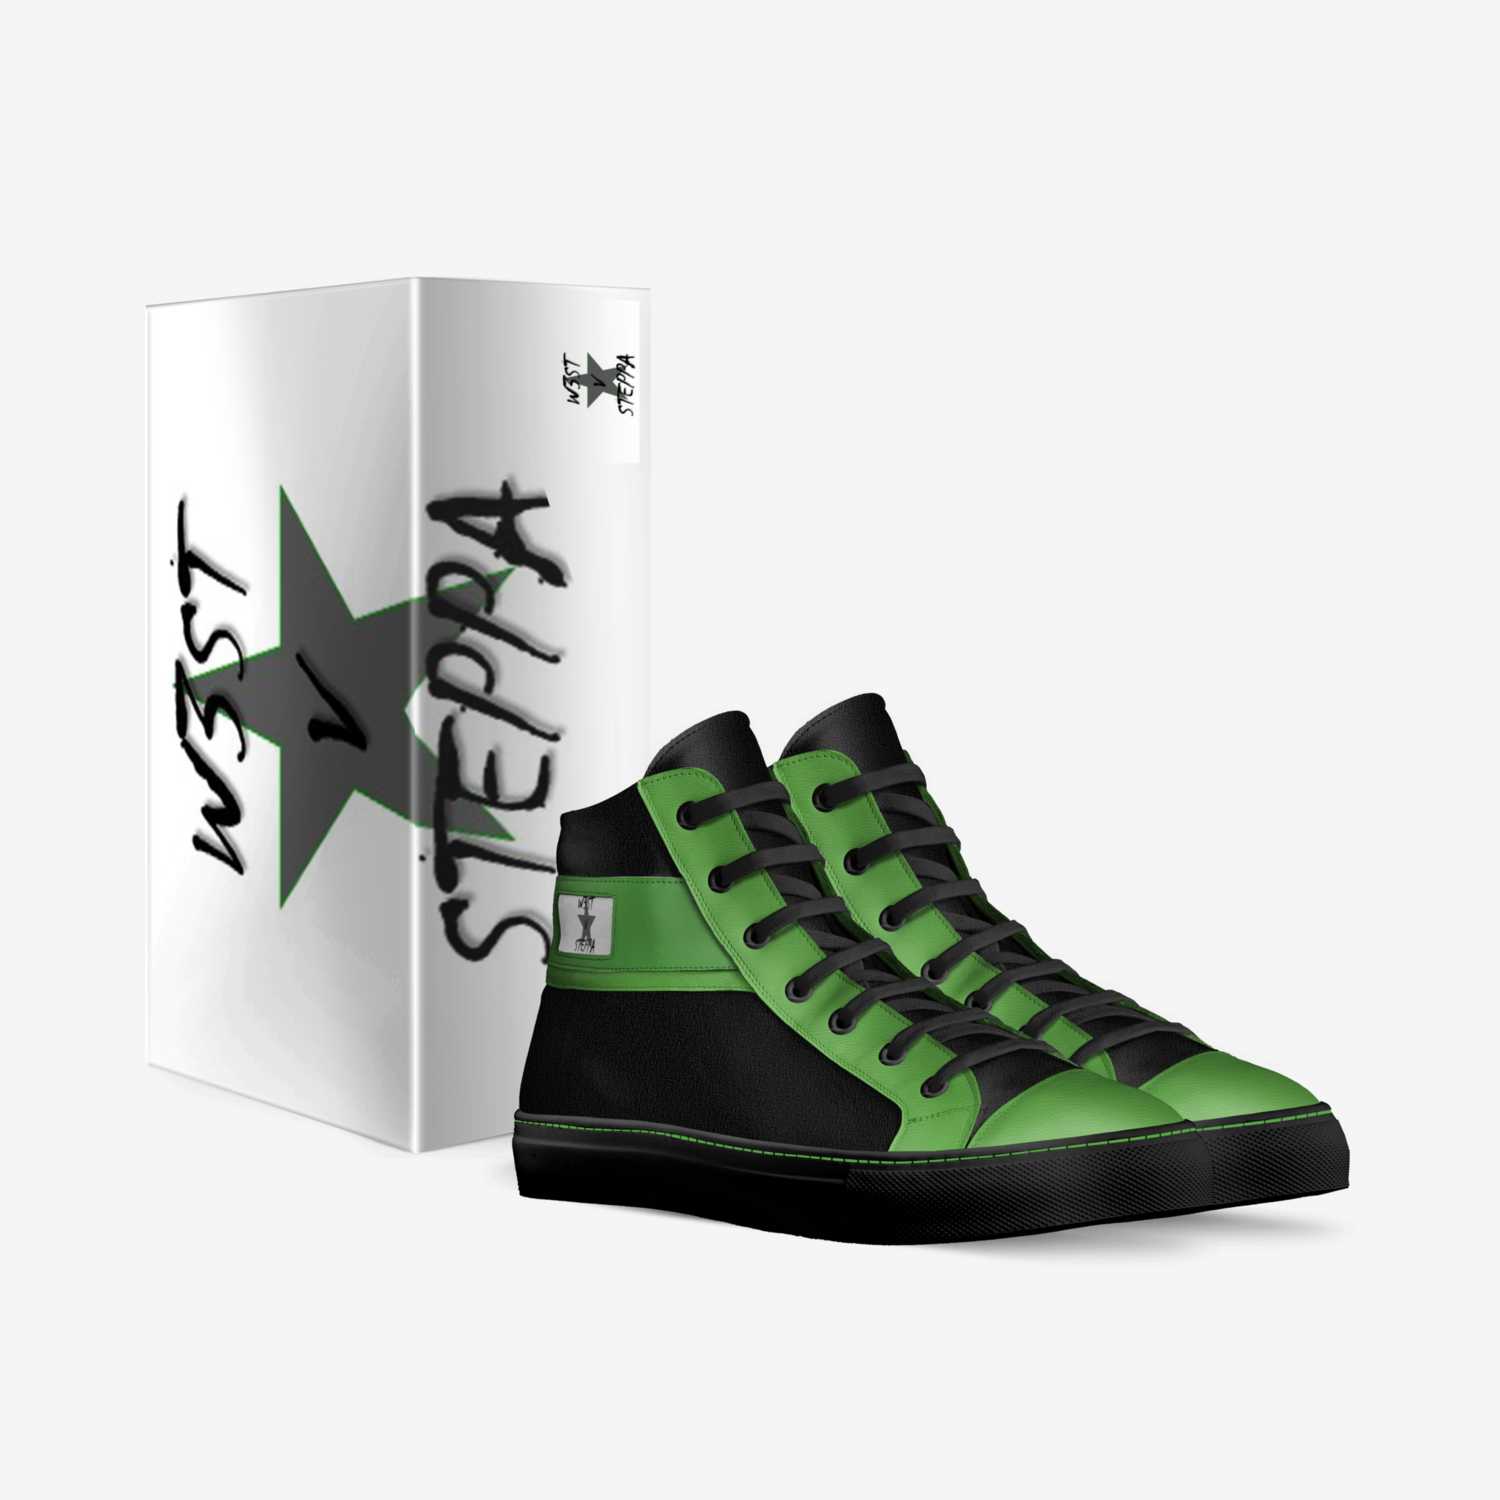 WestVSteppas custom made in Italy shoes by Larry West | Box view